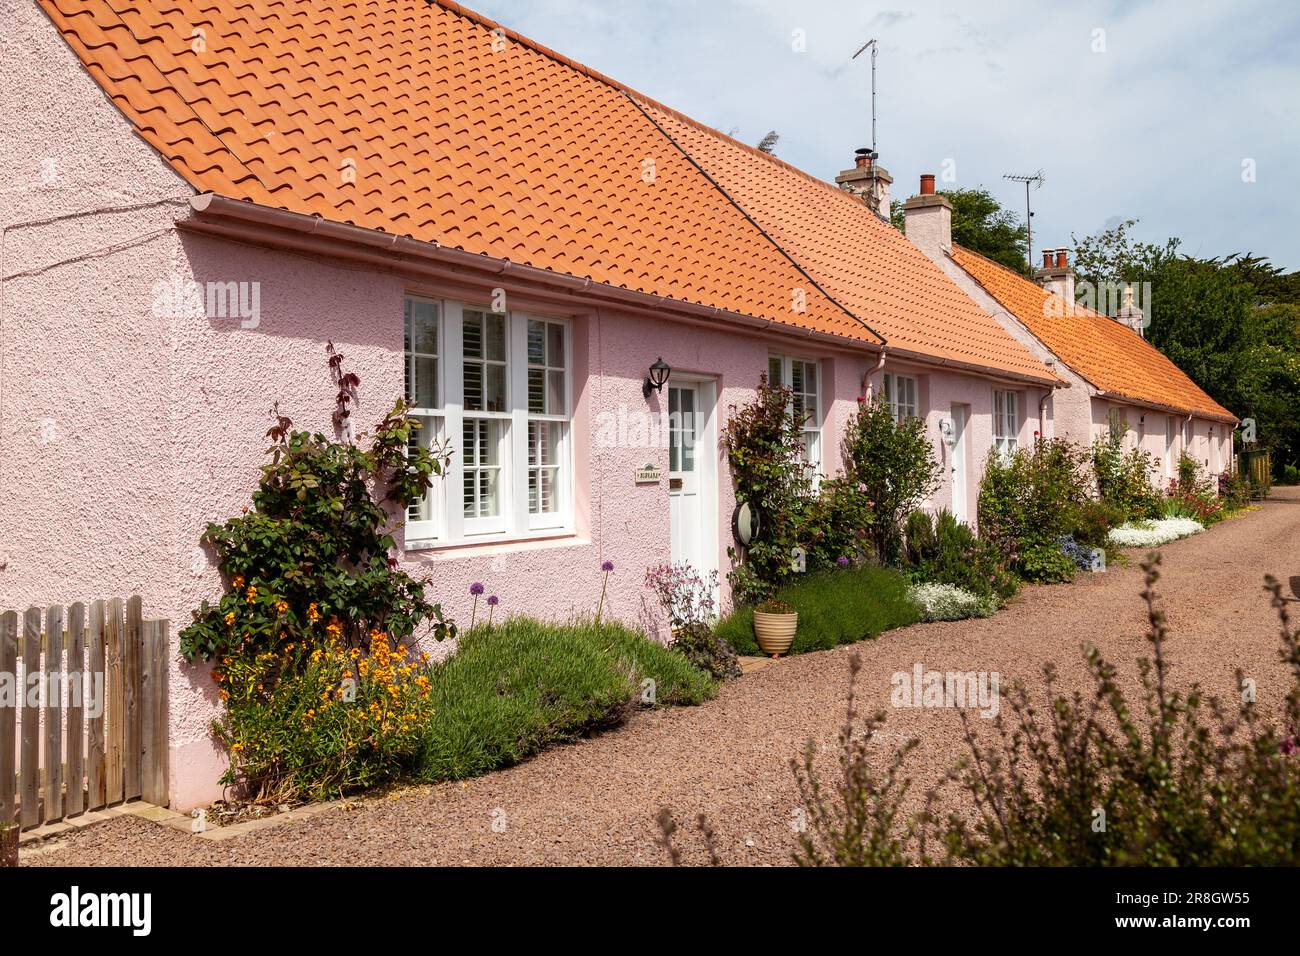 Pretty pink cottages in the conservation village of Tyninghame Stock Photo